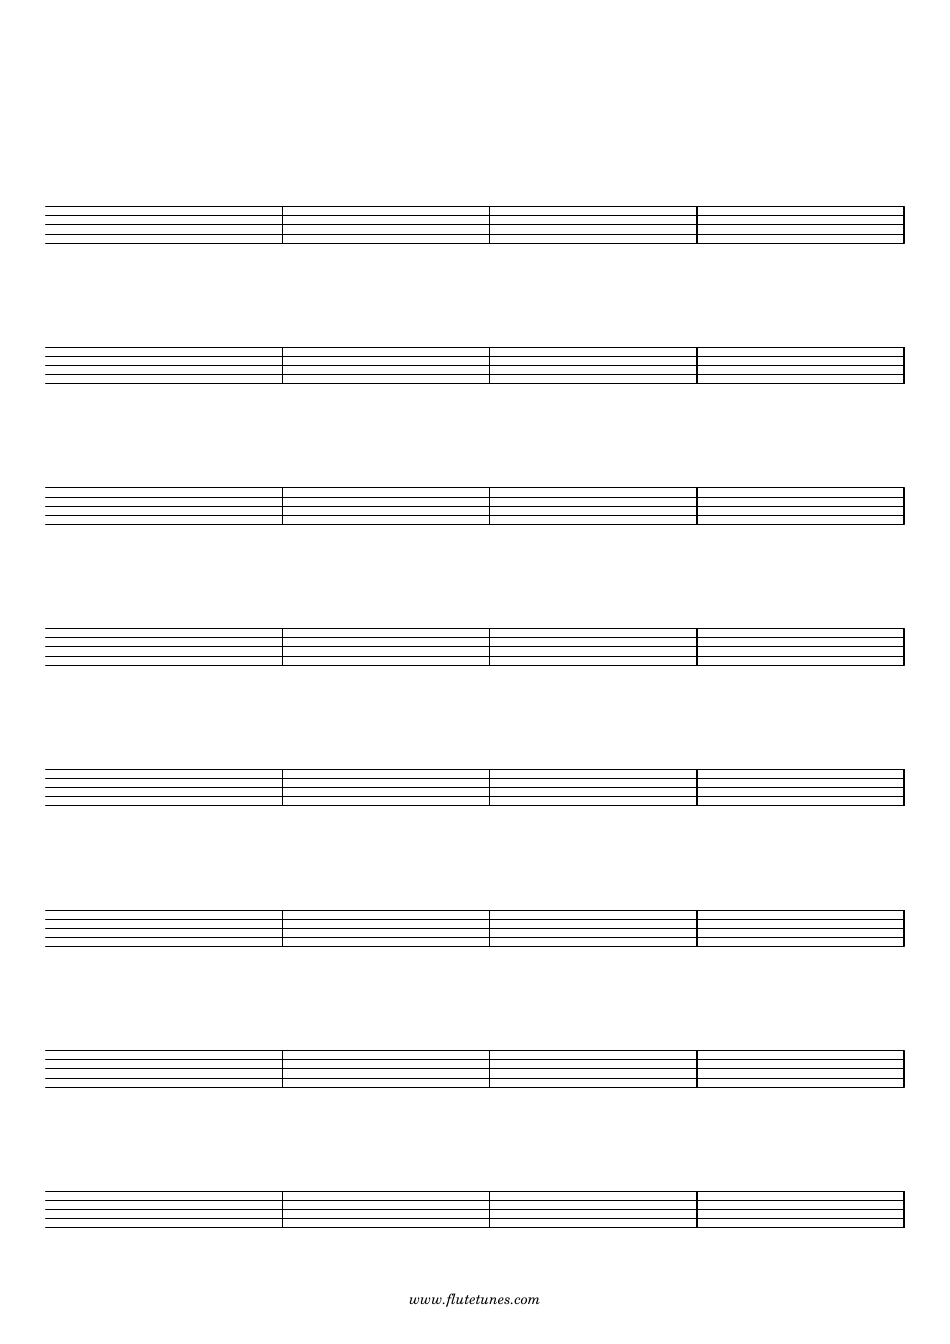 Blank Staff Paper 8 Staves 32 Bars Per Page Download Printable PDF 